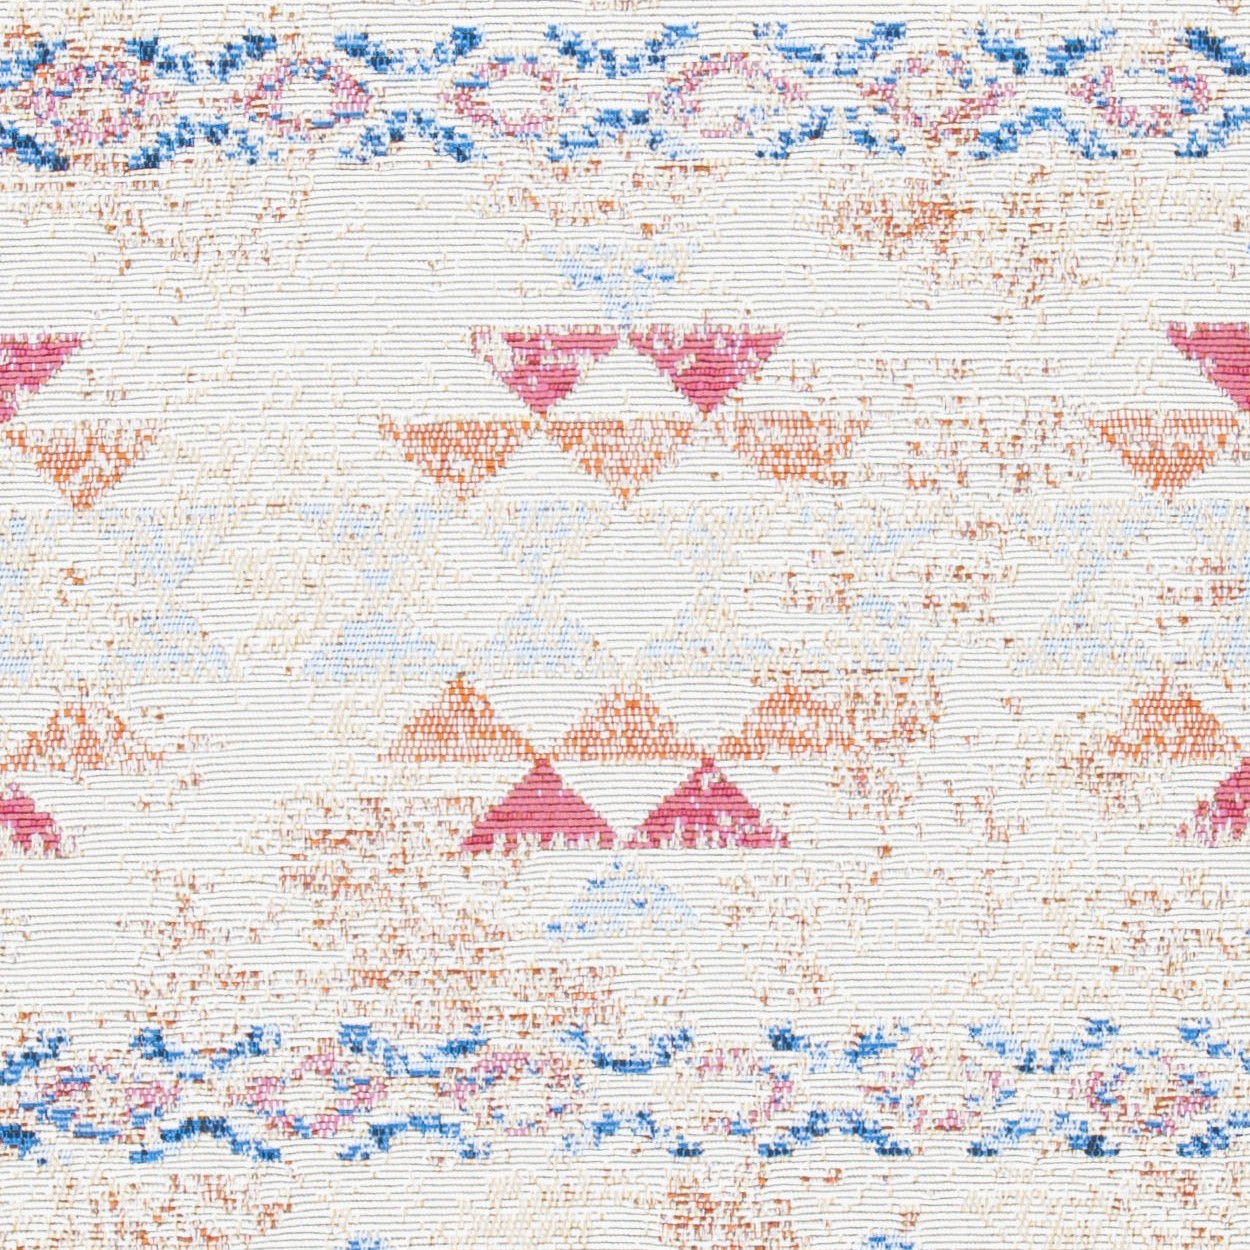 Safavieh Summer Donella Outdoor Boho Distressed Area Rug, Ivory/Red, 5'3" x 7'6" - image 5 of 6